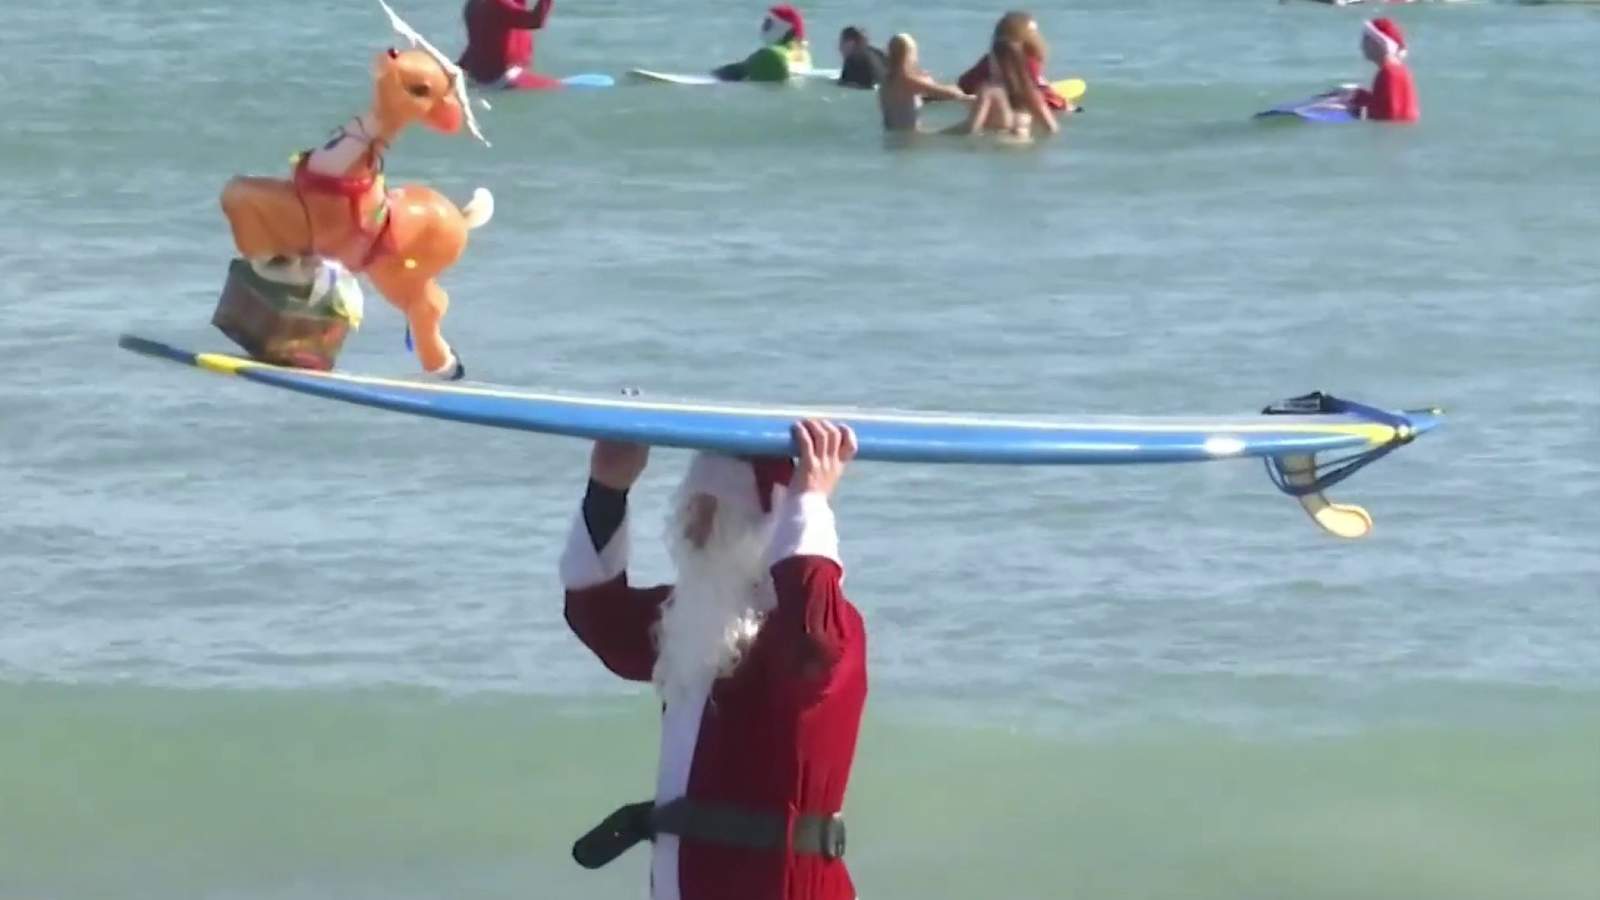 Surfing Santas scales back annual Christmas Eve event during coronavirus pandemic